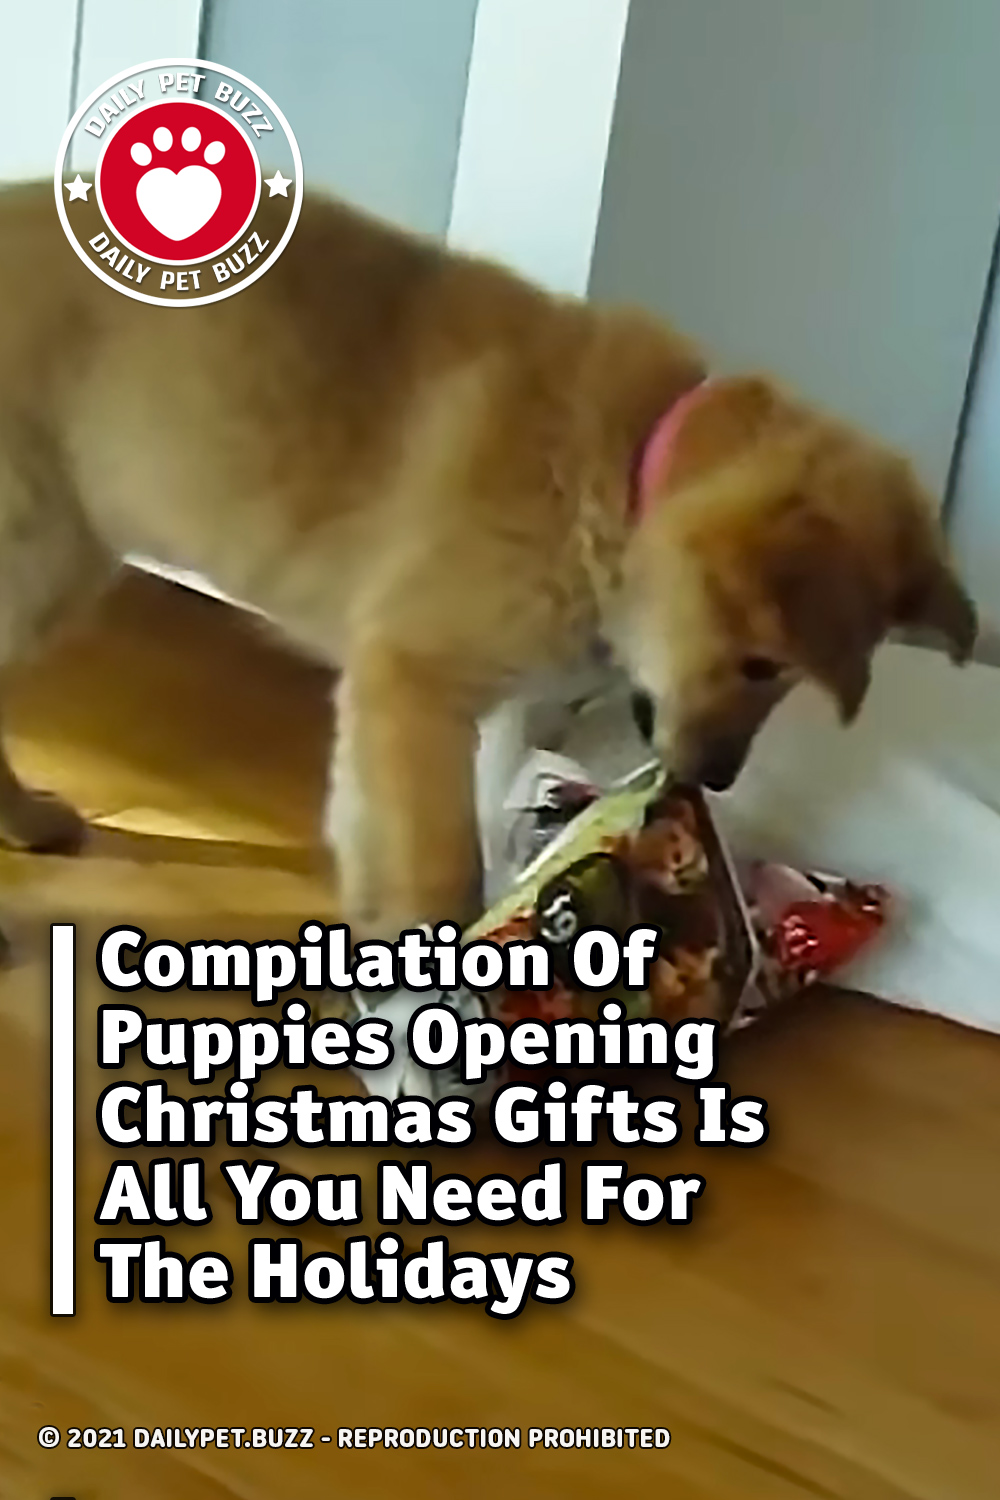 Compilation Of Puppies Opening Christmas Gifts Is All You Need For The Holidays